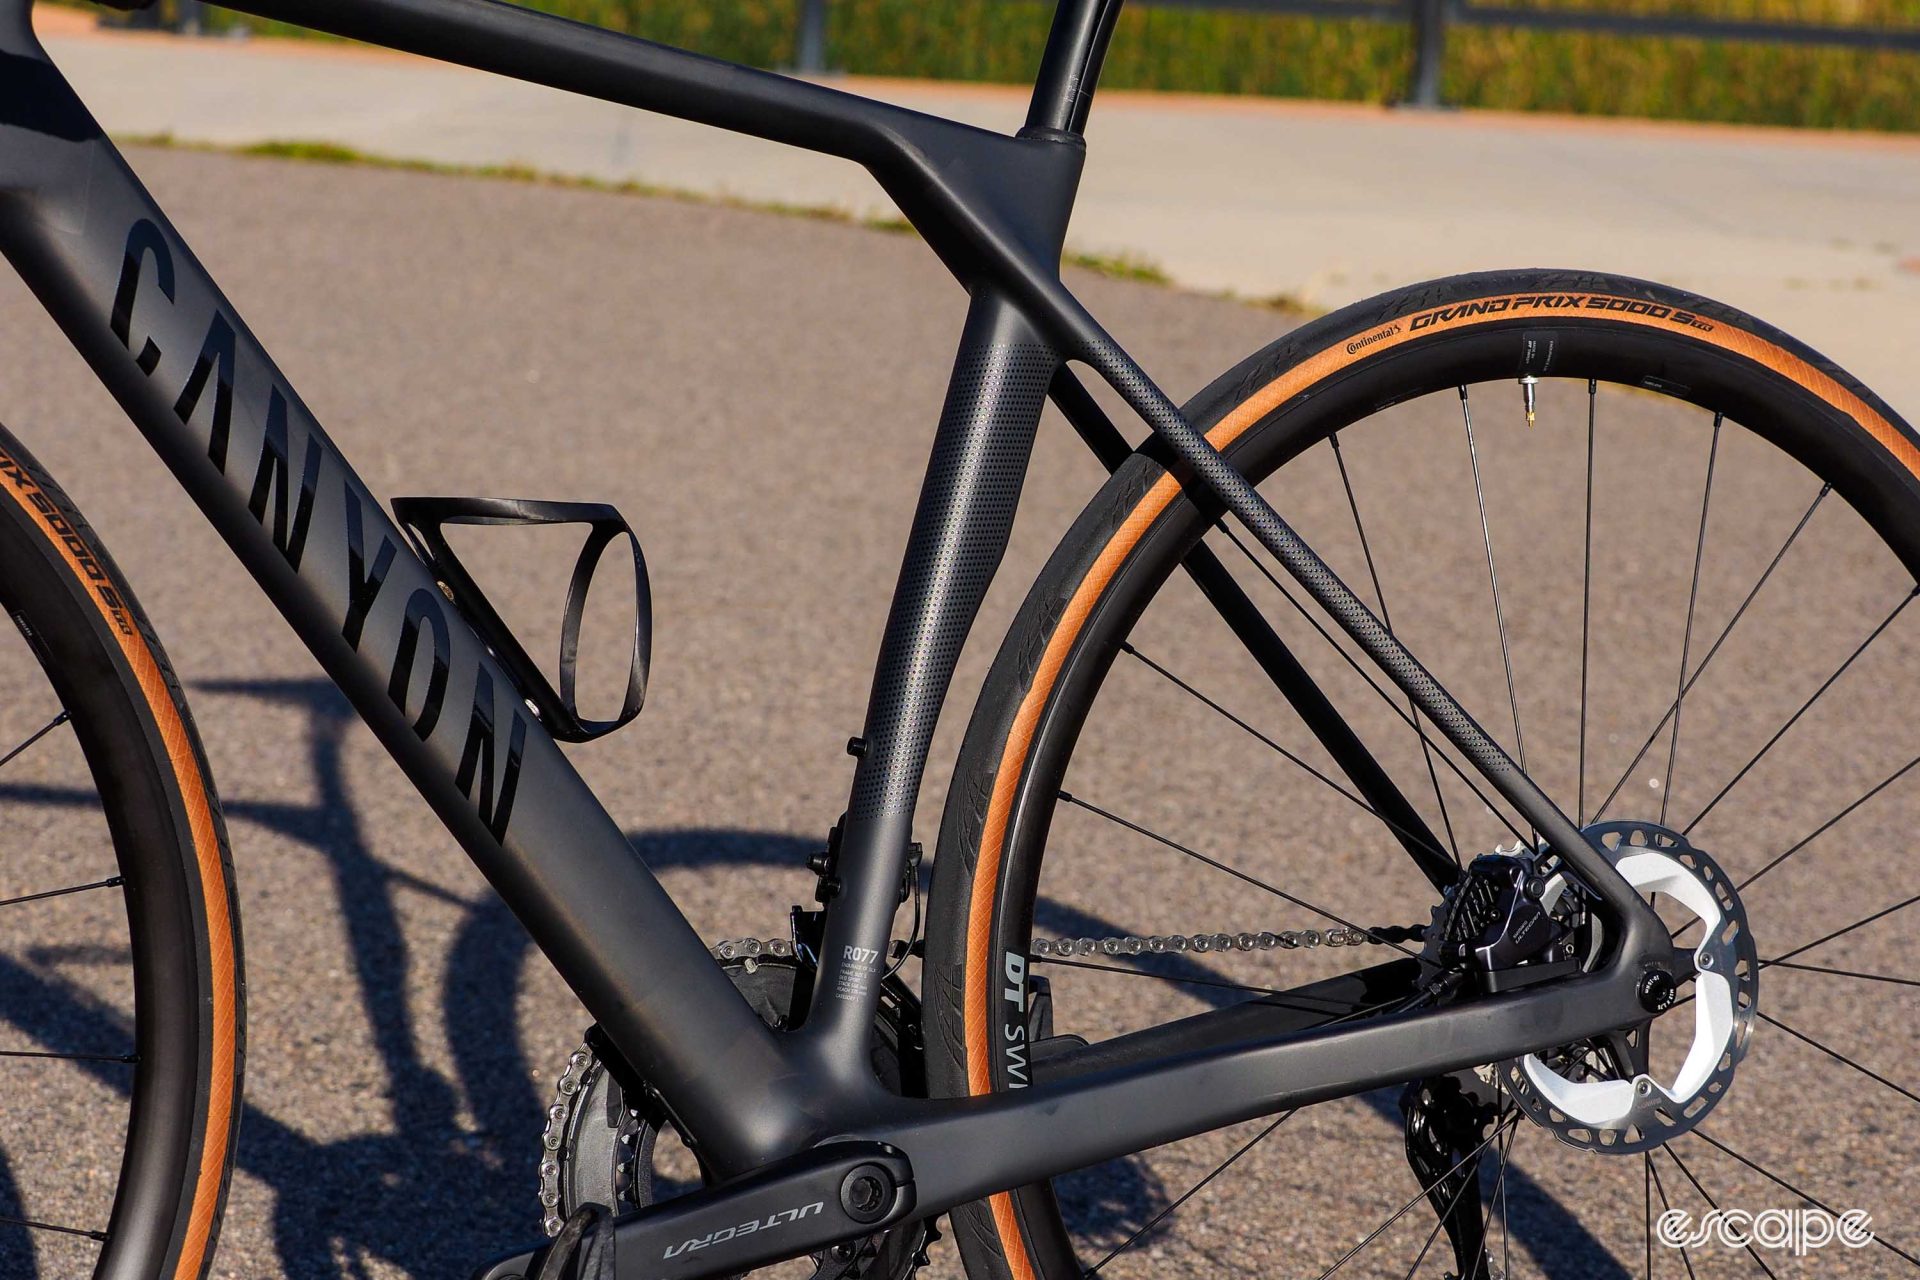 As the 2024 Canyon Endurace CF rear triangle shows, a primary focus is rider comfort without the expense of efficiency. Large chainstays and thin seatstays balance rigidity and ride quality.